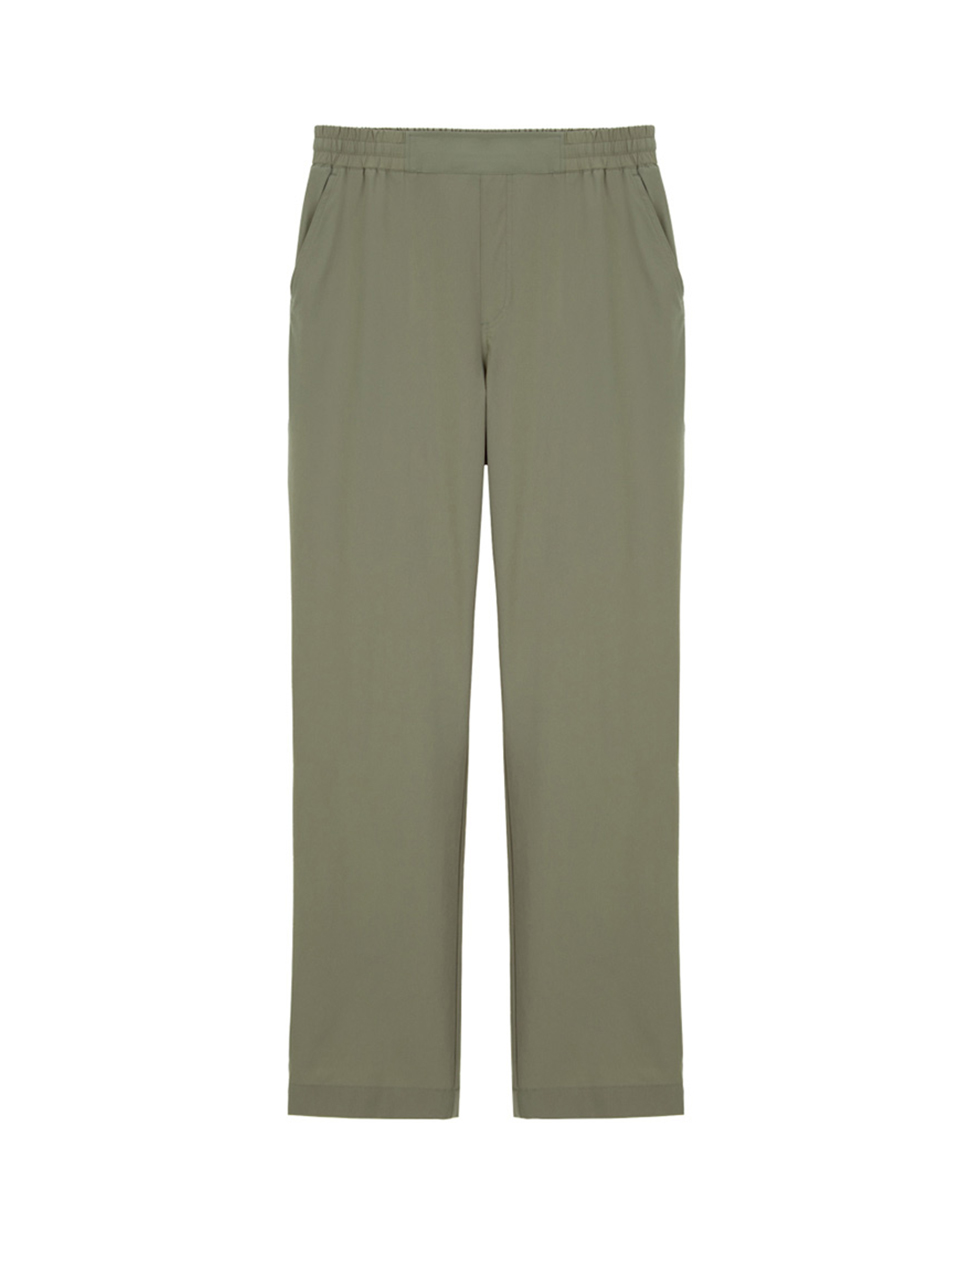 [LIMITED] SUMMER STRETCH SOLID COOL PANTS (FOR MAN) - LEAF KHAKI